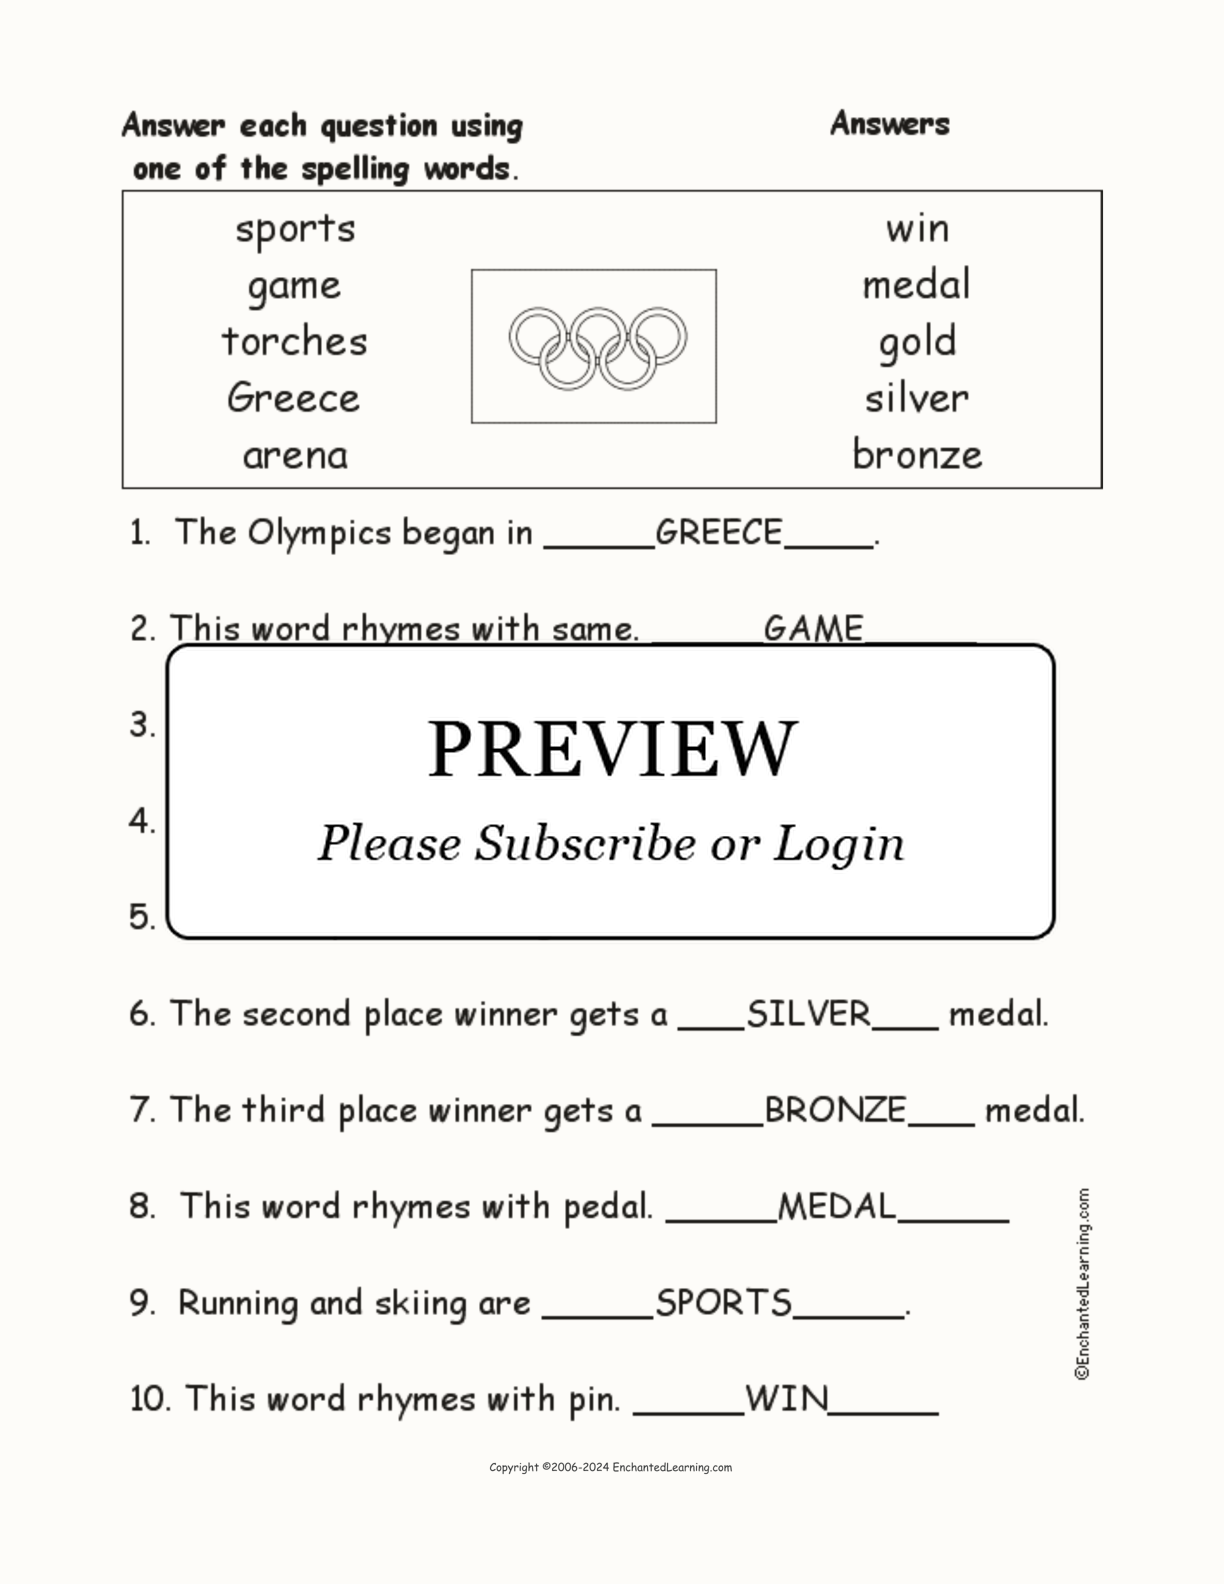 Olympics Spelling Word Questions interactive worksheet page 2